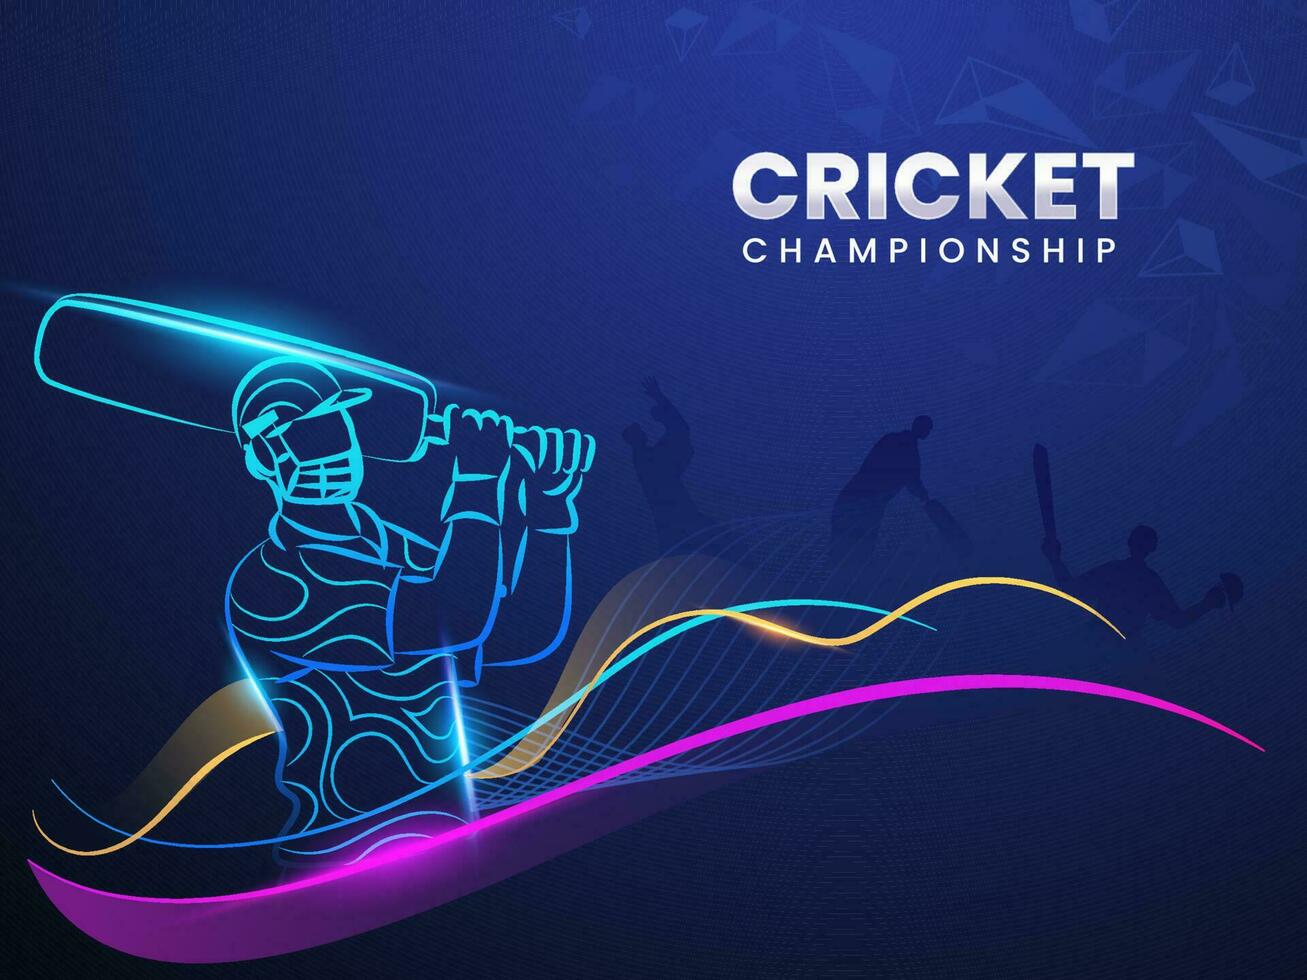 Cricket Championship Concept With Linear Style Batsman Player, Light Effect And Abstract Waves On Blue Triangle Element Background. vector